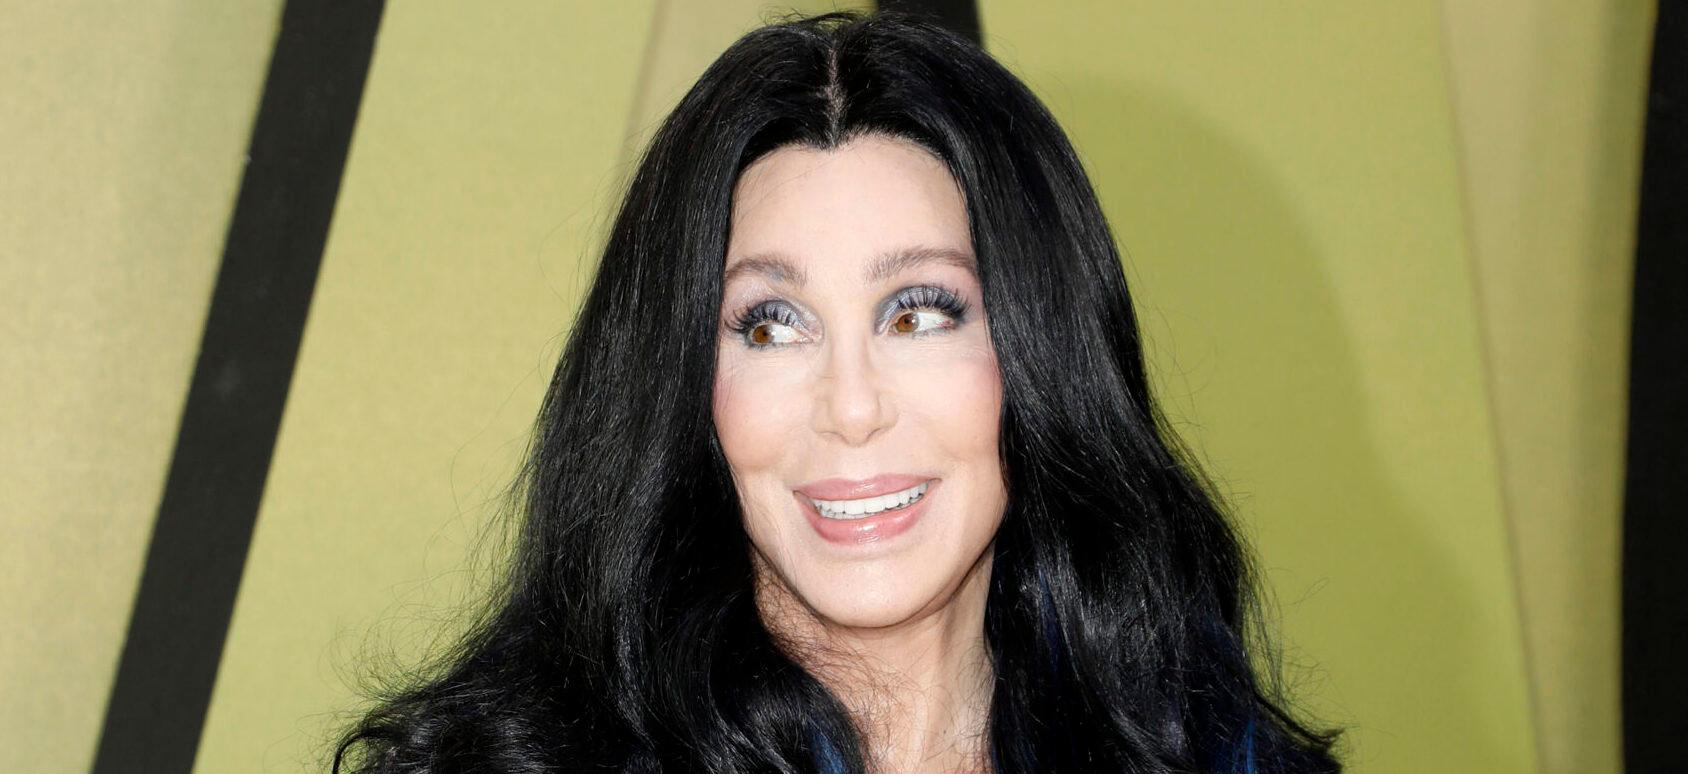 Here’s What Fans Are Saying About Cher’s Anticipated Christmas Album